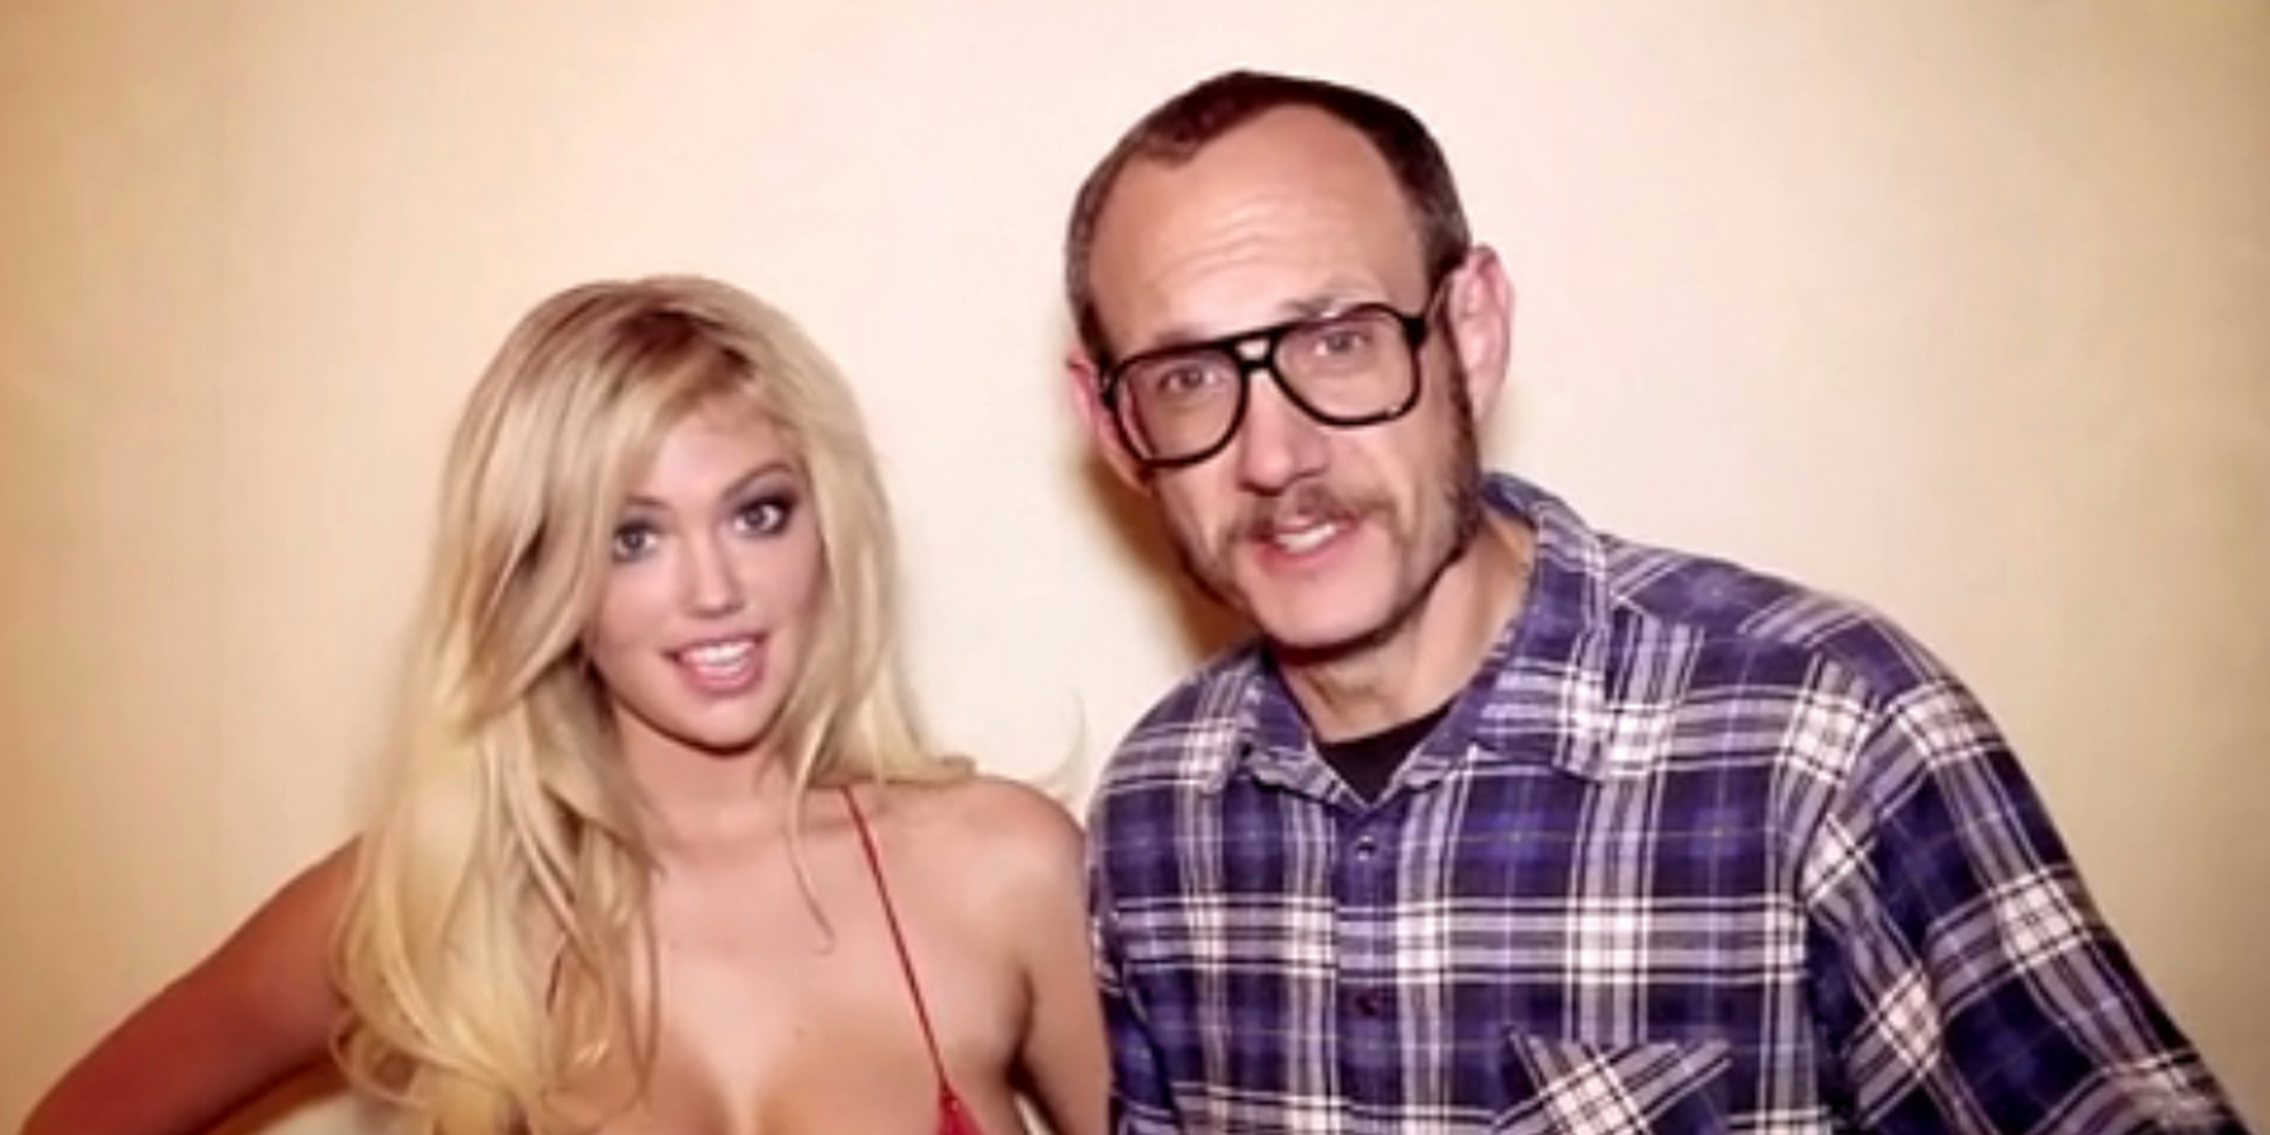 Kate Upton Pov Porn - Kate Upton had no idea Terry Richardson would put out that 'Cat Daddy'  video - The Daily Dot